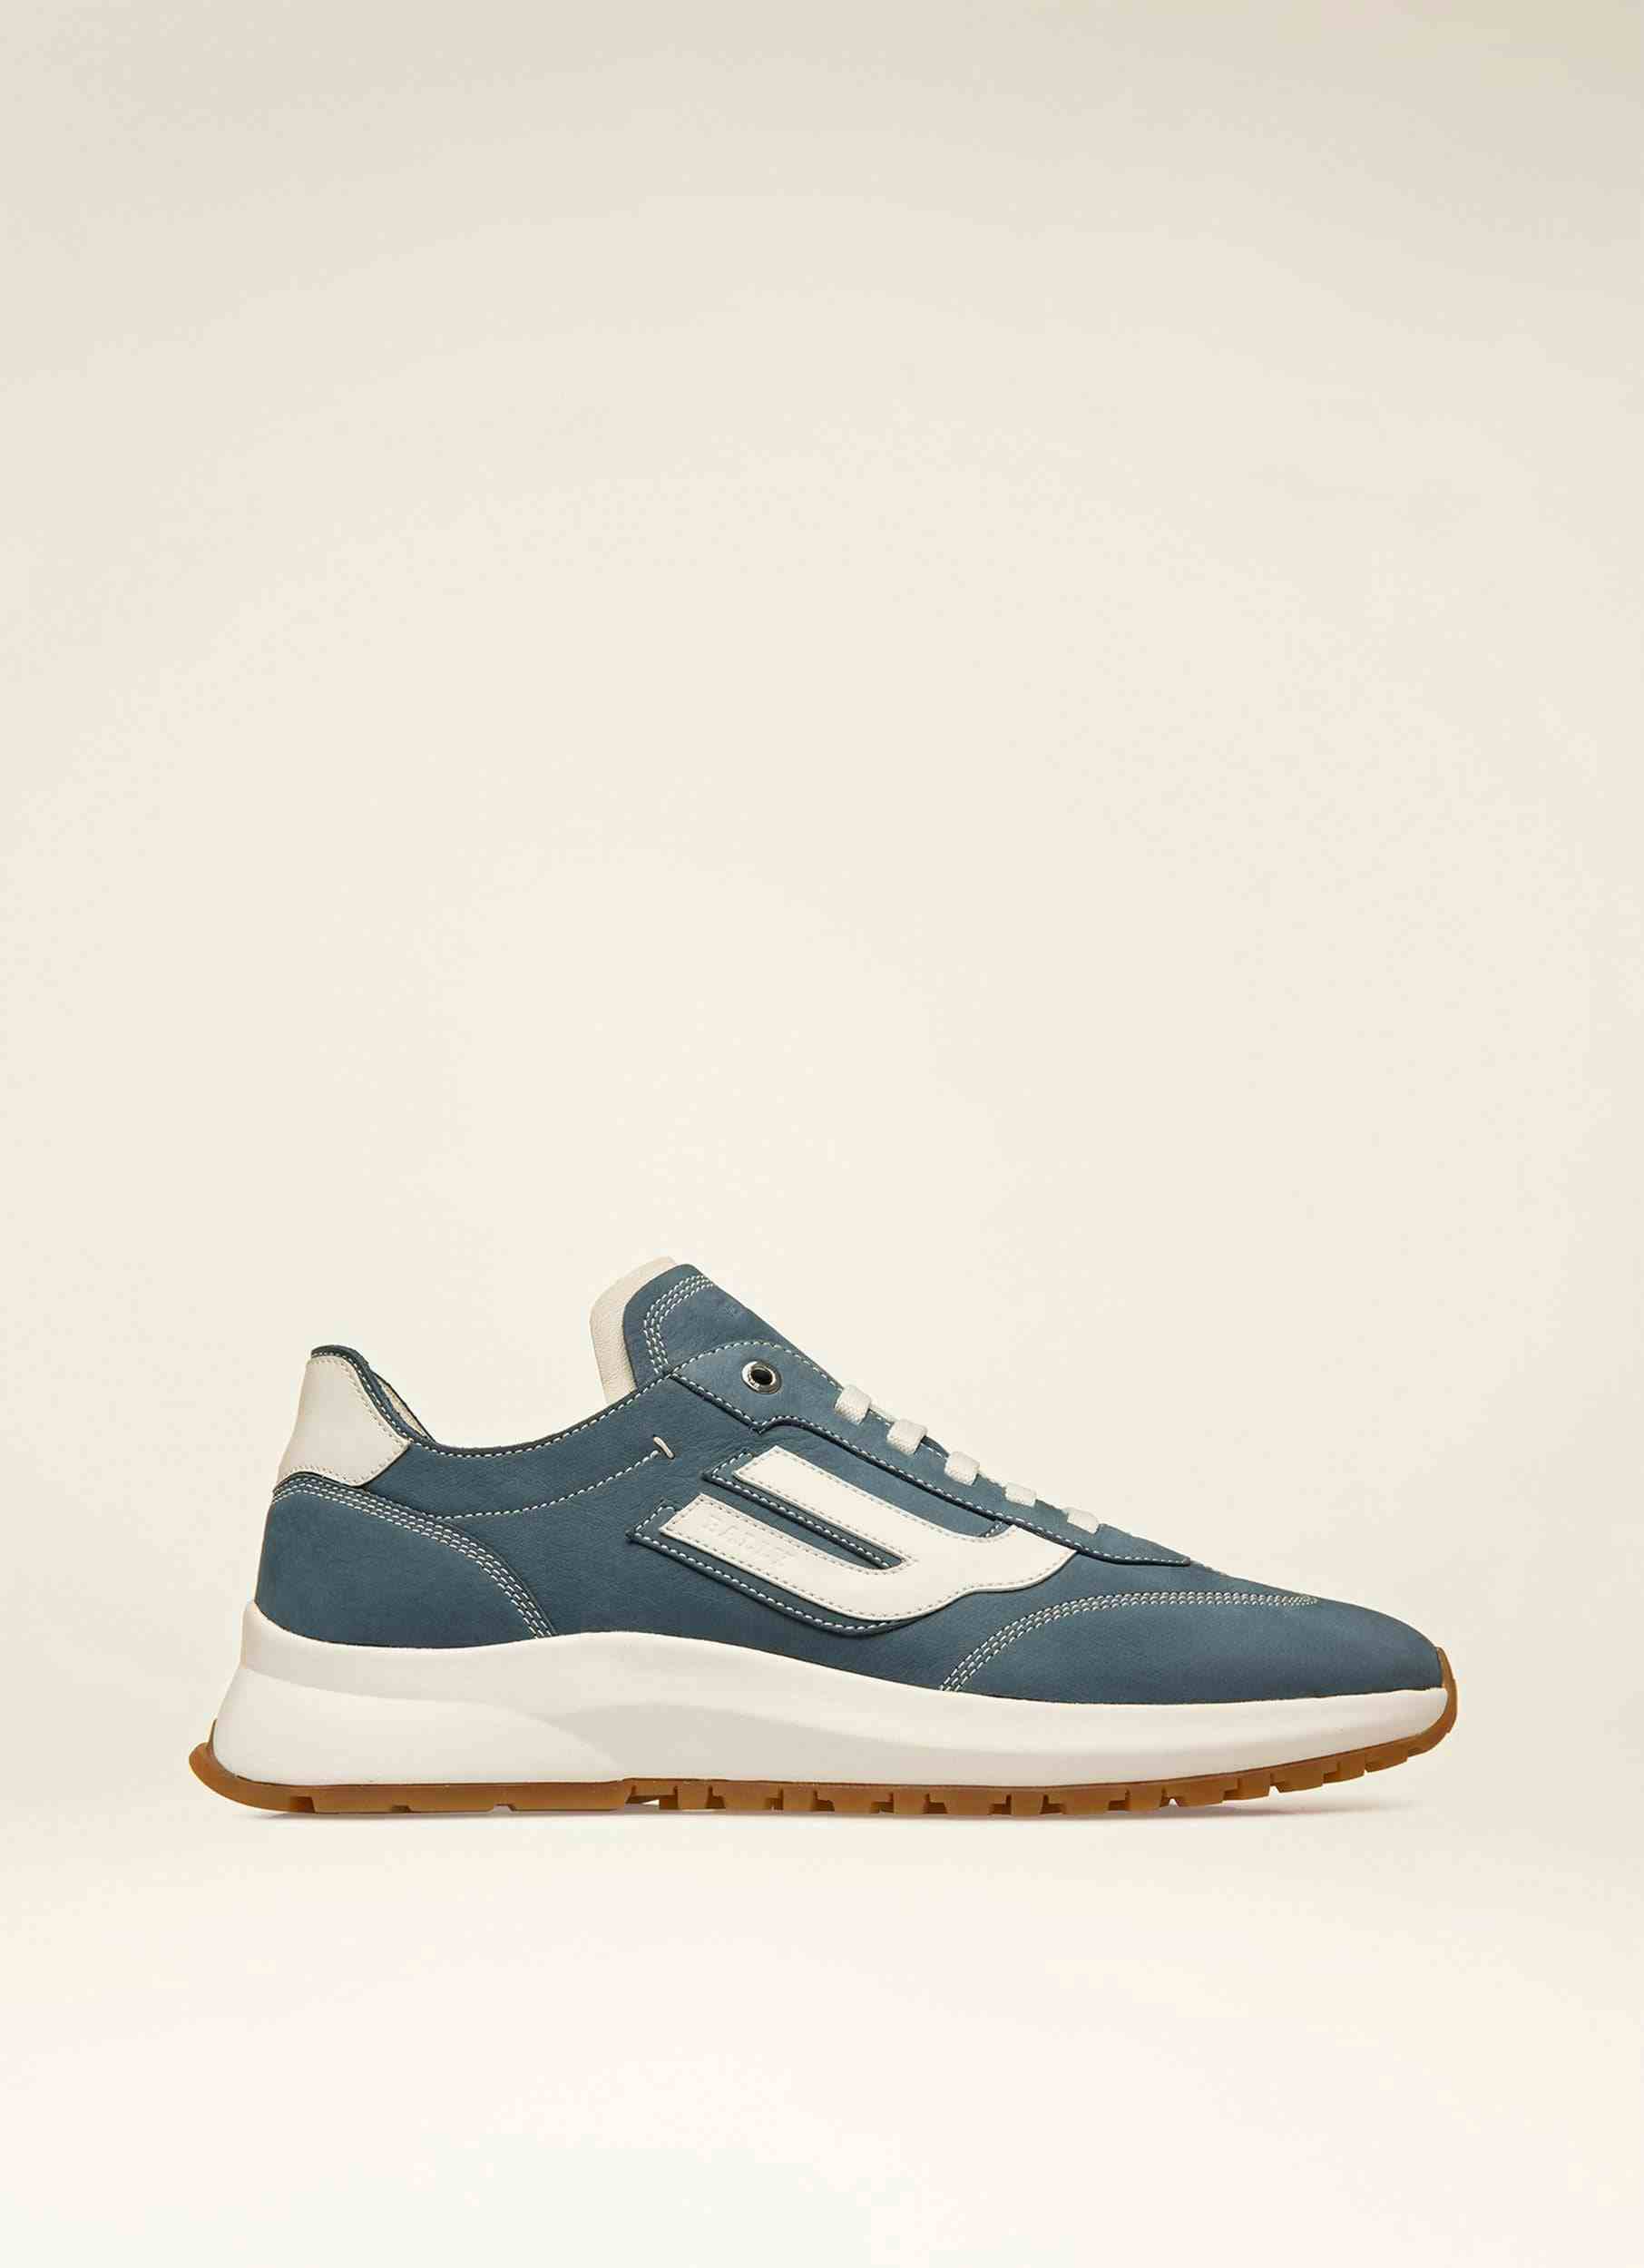 OUTLINE Leather Sneakers In Blue & White - Men's - Bally